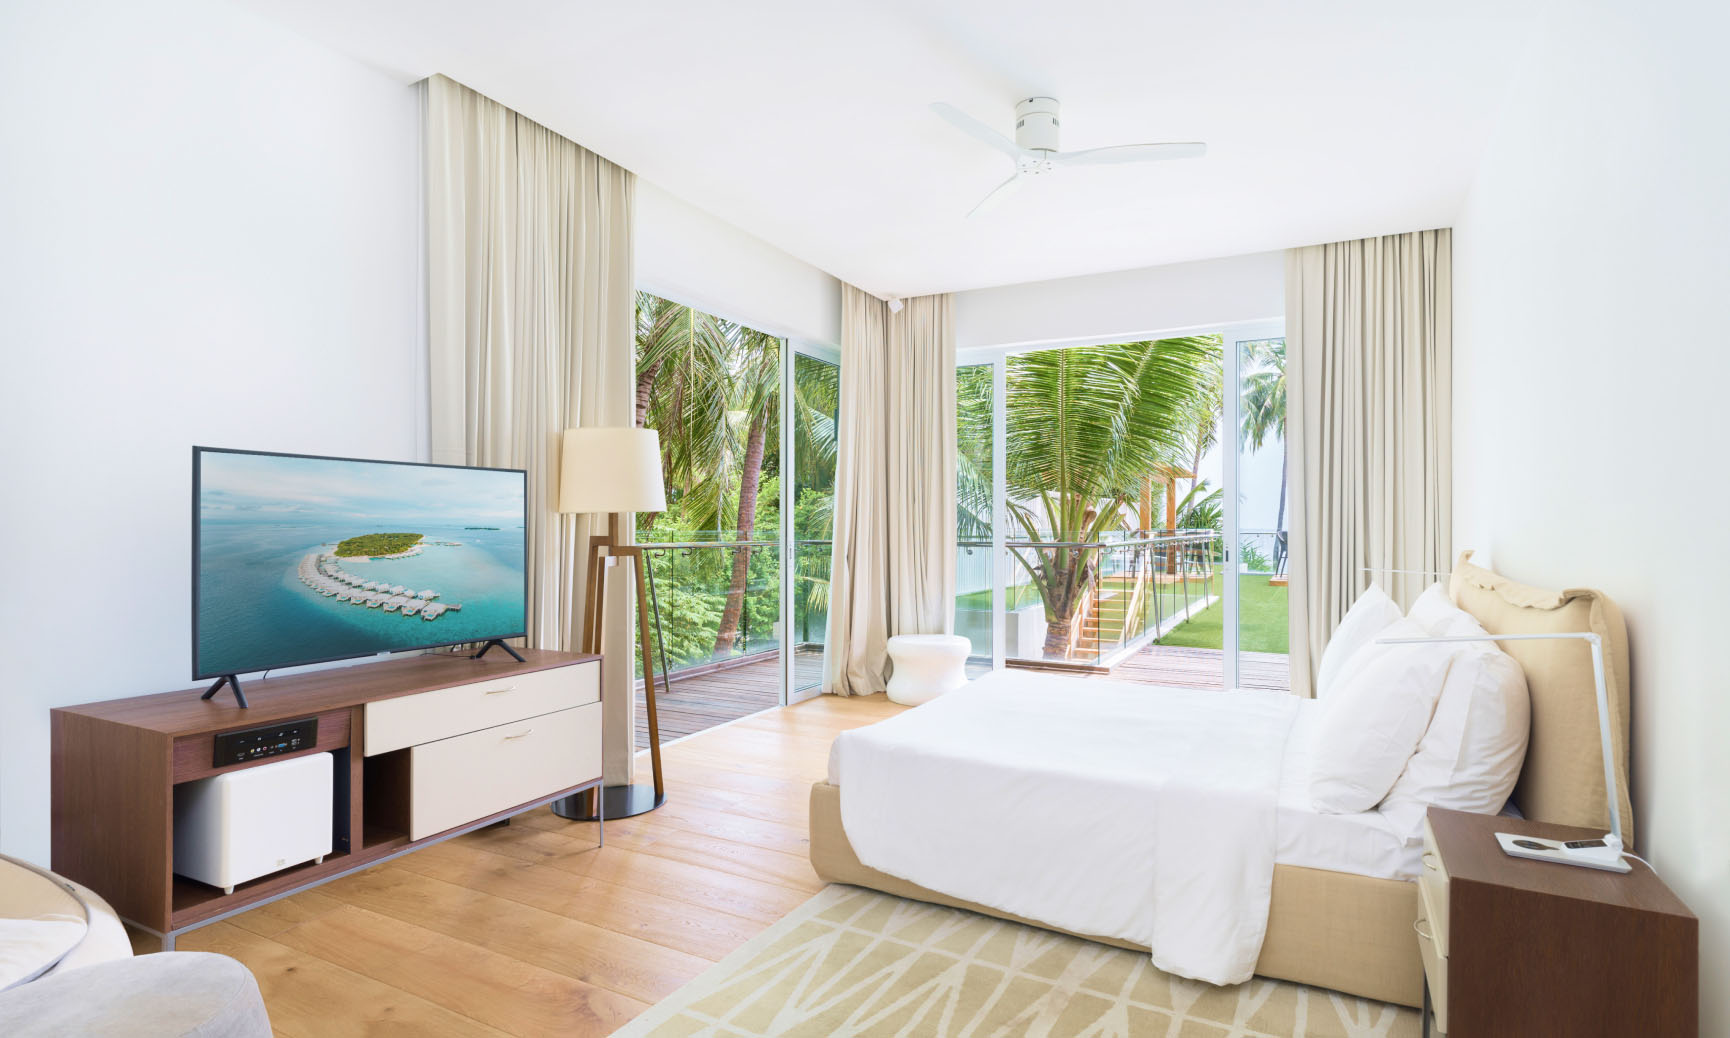 A suite with a king size bed, ensuite bathroom, and floor to ceiling windows at the Amilla Estate, our Maldives Mansion.